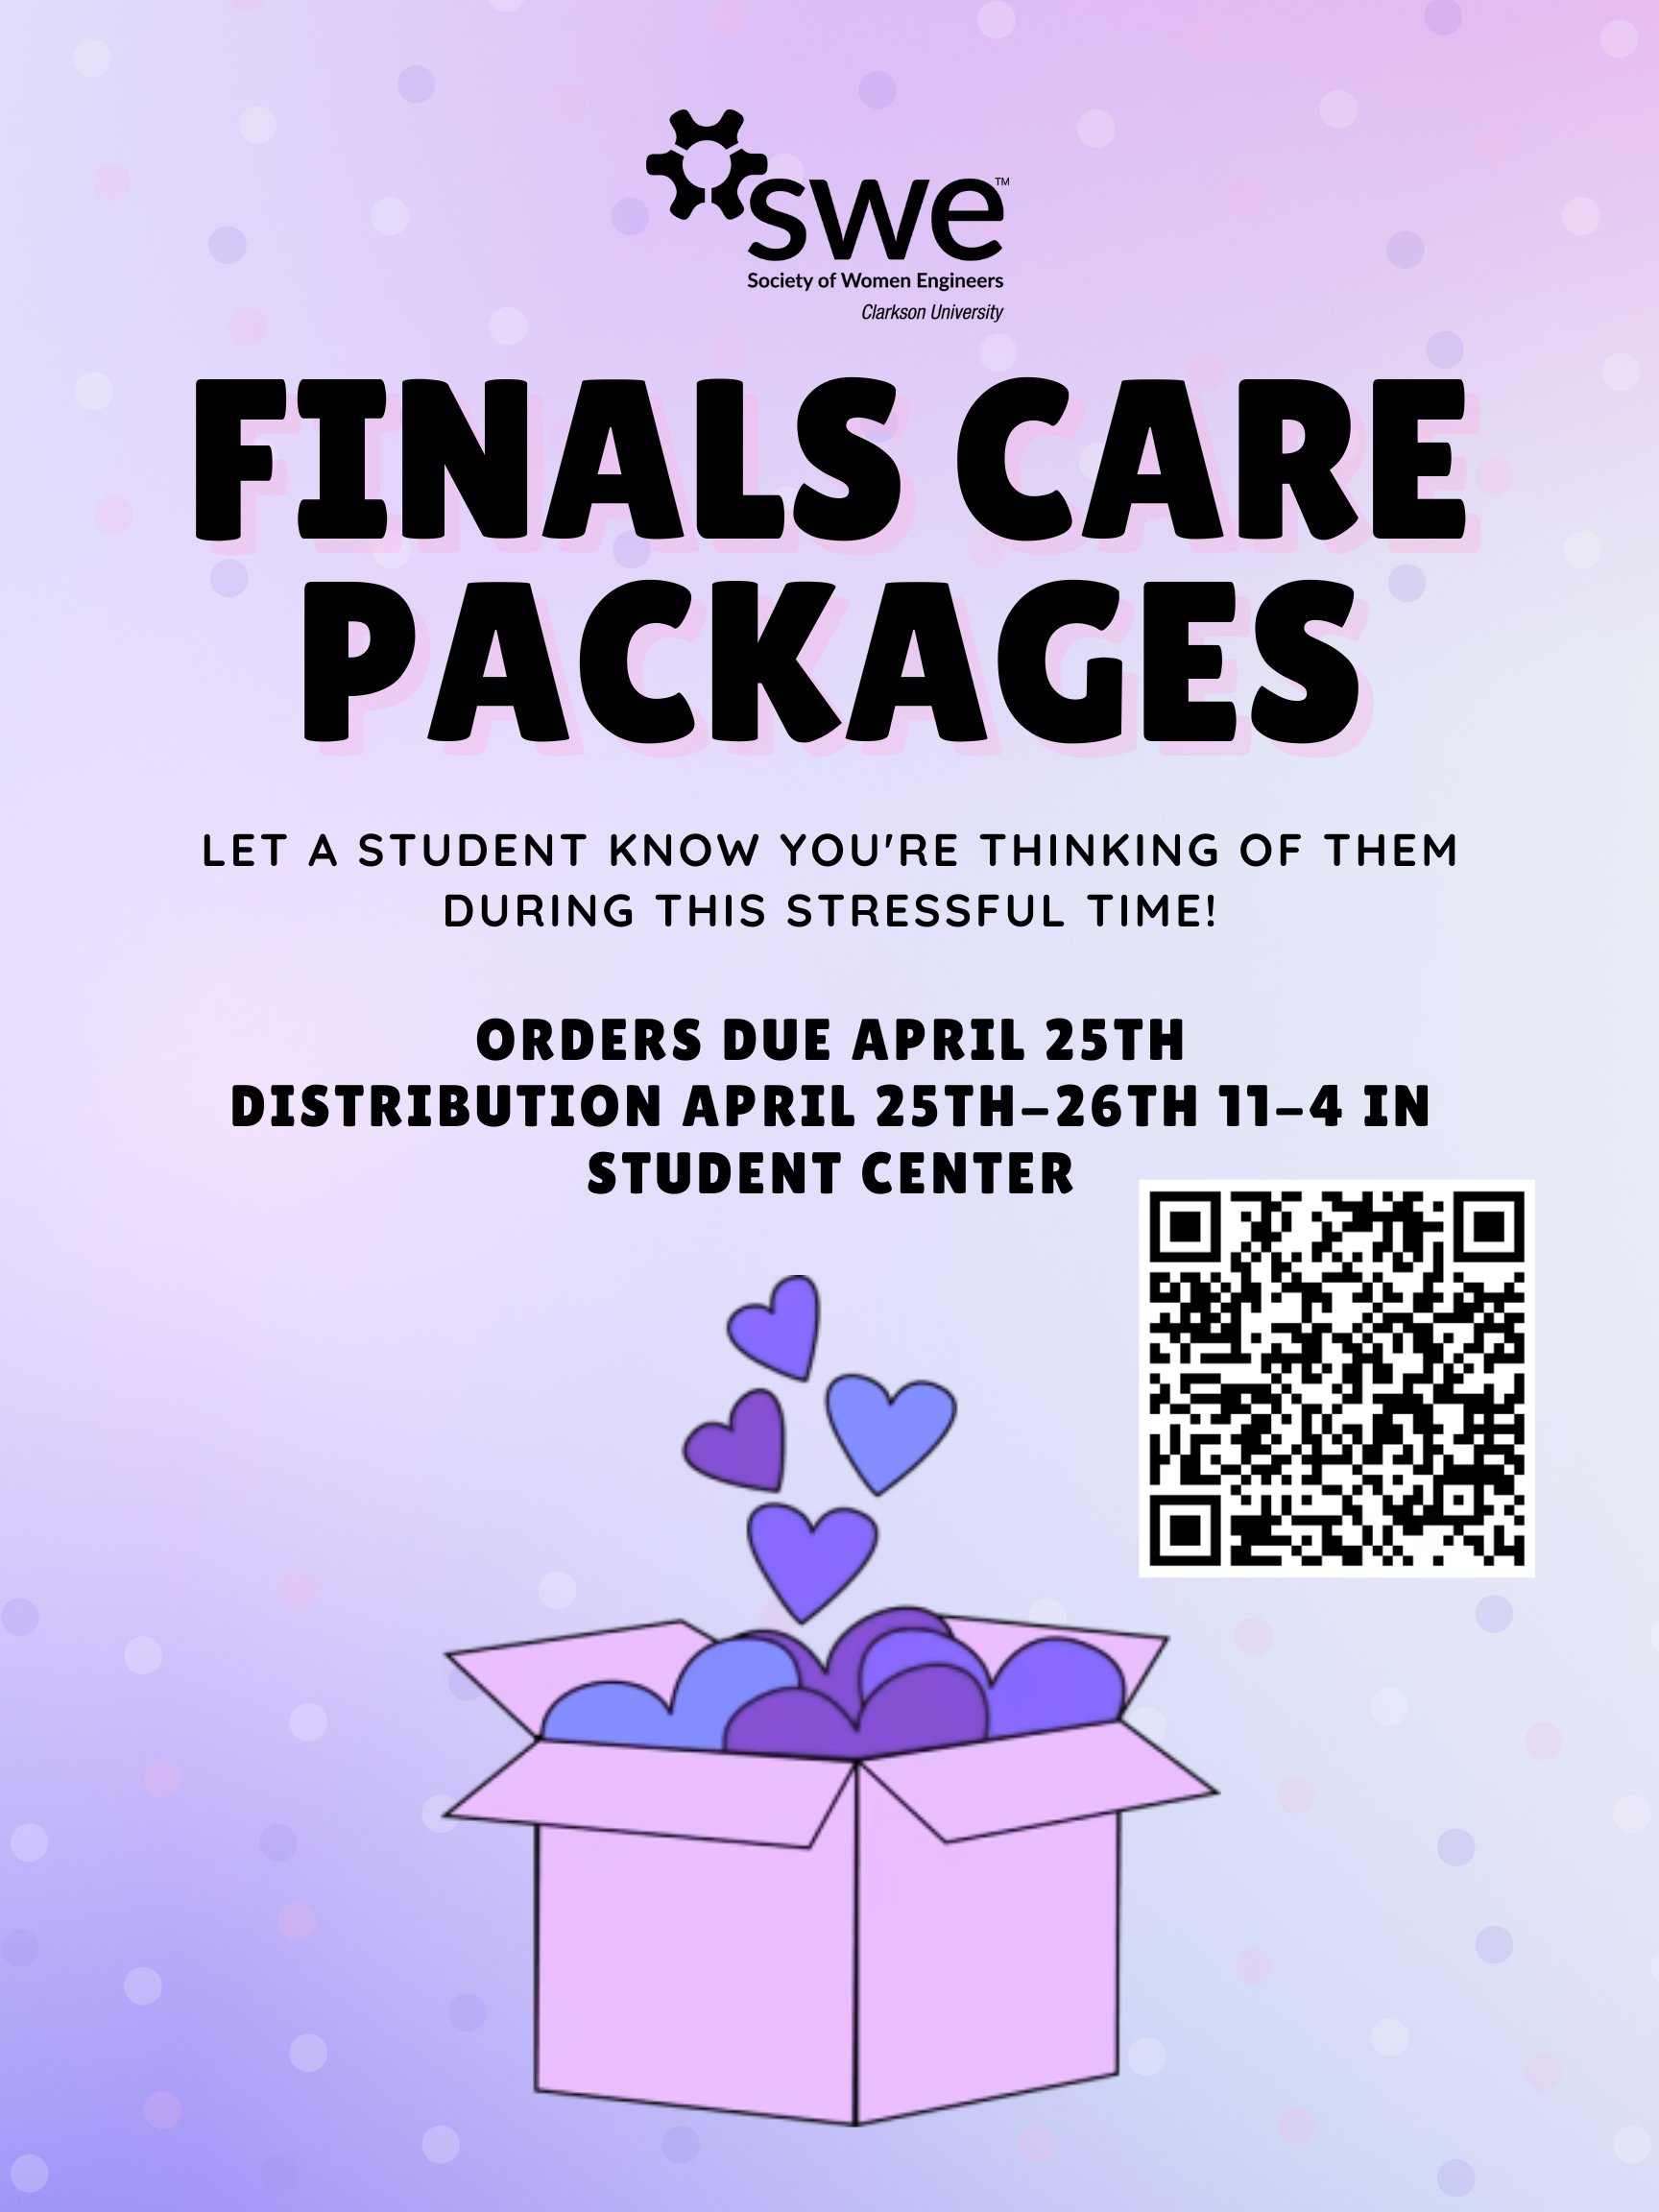 A purple promotional poster for a care package sale, featuring a box containing hearts. The poster reads "Society of Woman Engineers Finals Care Packages. Let a student know you're thinking of them during this stressful time! Orders due April 25th, distribution April 25th-26th at 11AM-4PM in the Student Center"